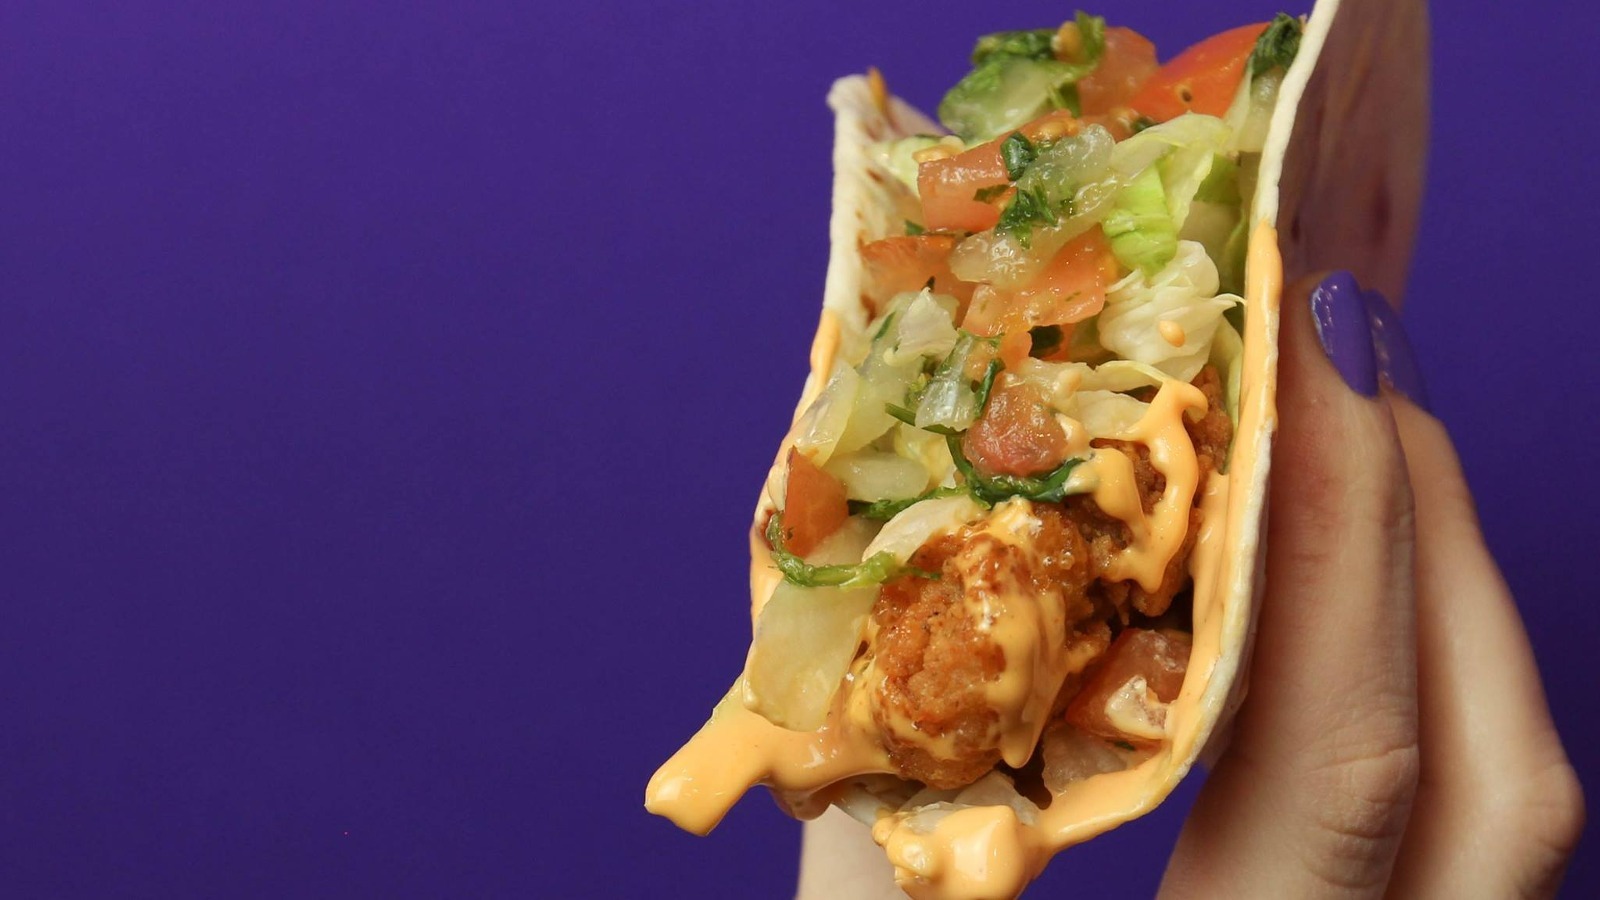 Taco Bell's Crispy Chicken Tacos Are Making A Mouth-Watering Return